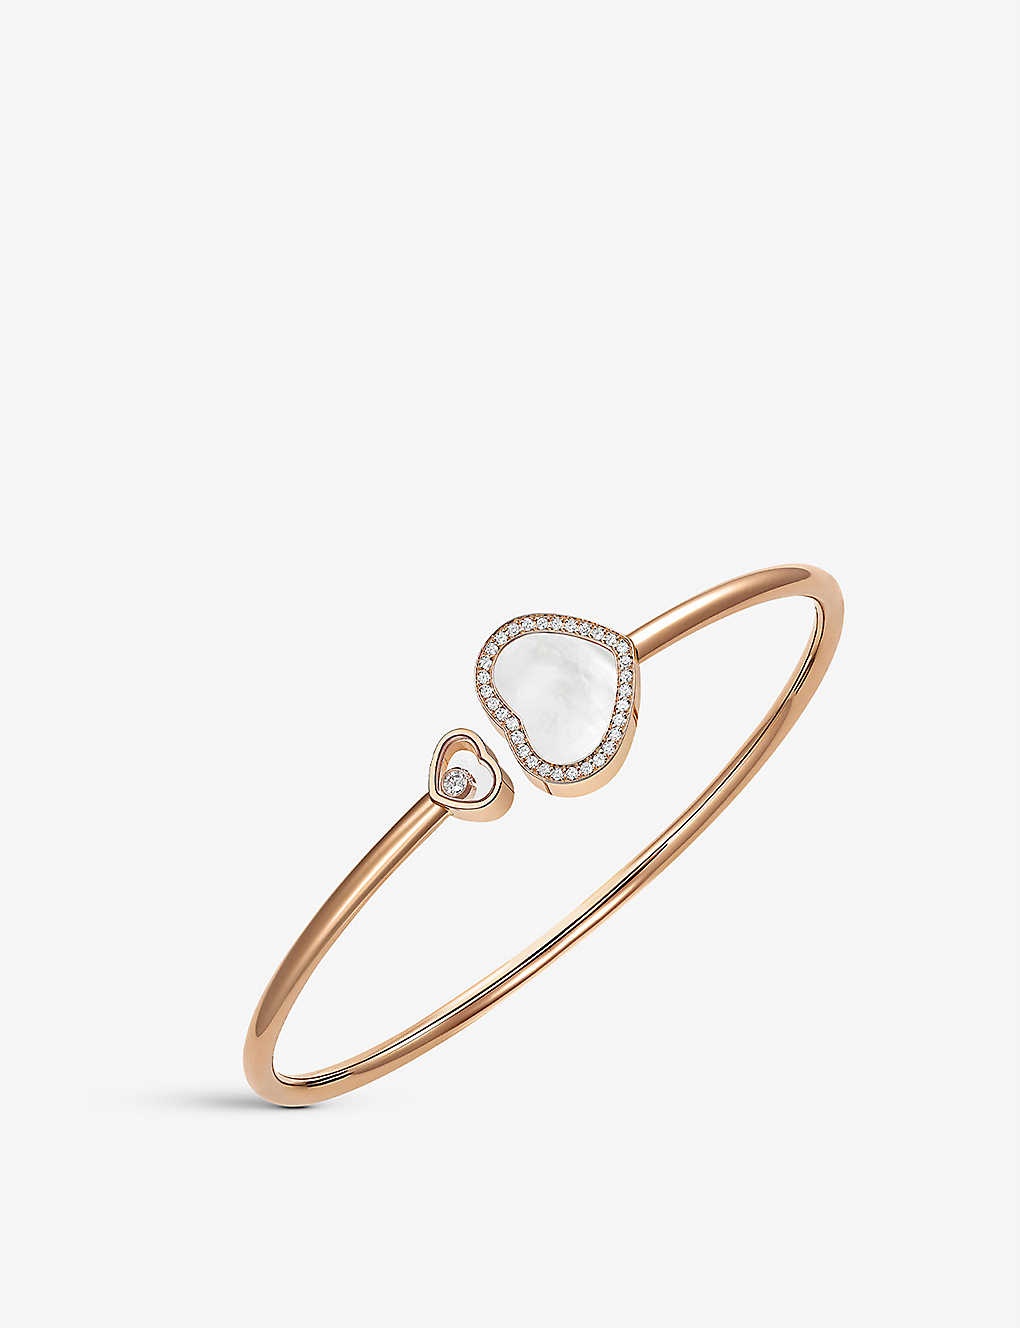 Happy Hearts 18ct rose-gold, 0.19ct round-cut diamond and mother-of-pearl bracelet - 1